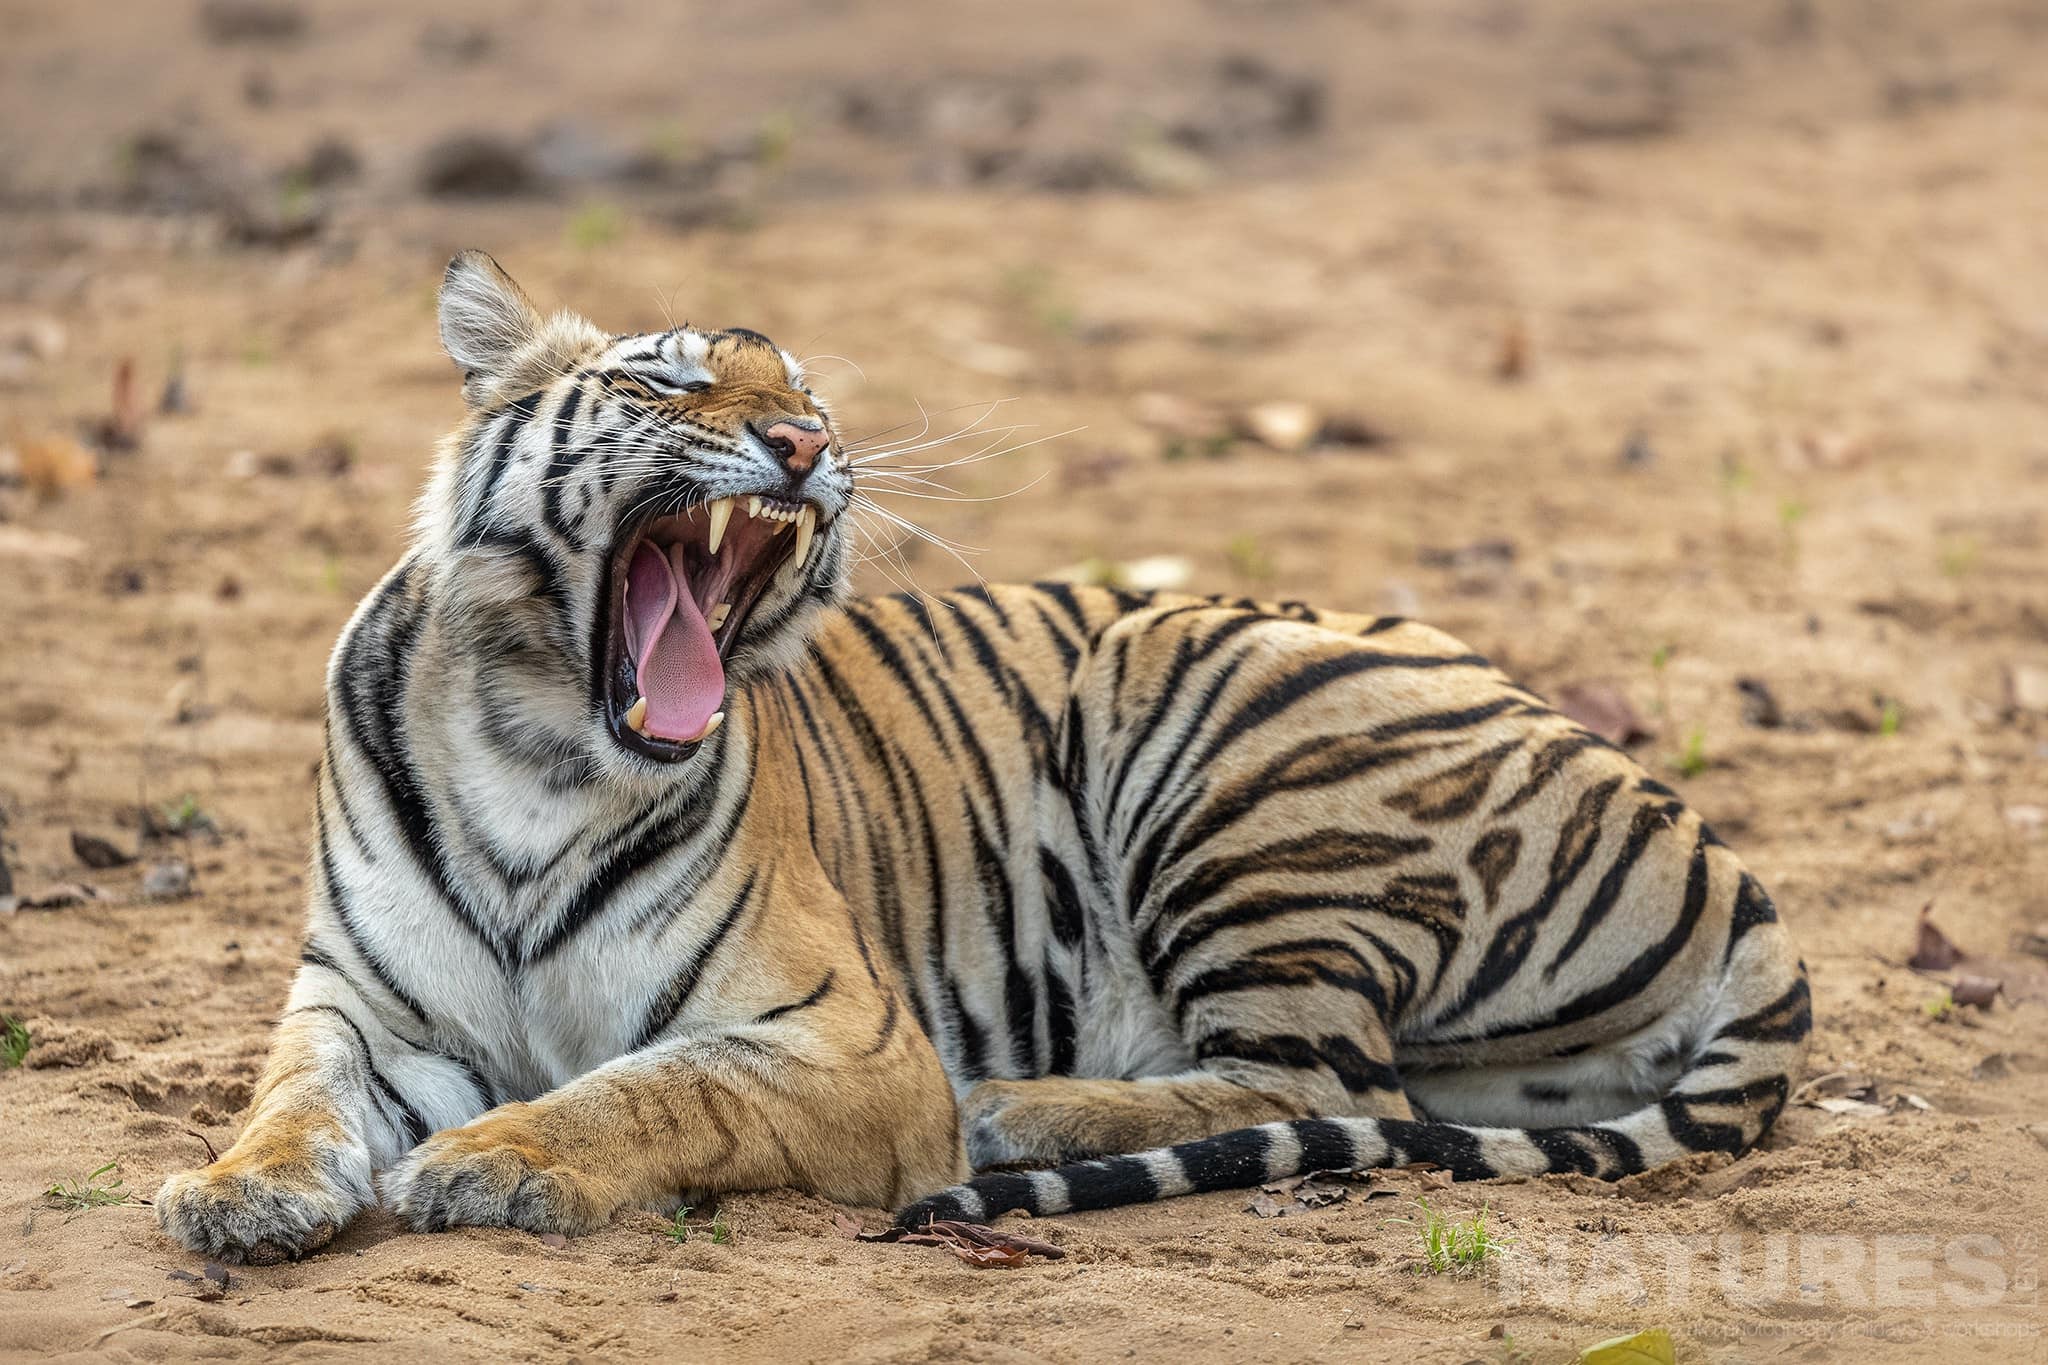 One of Bandhavgarhs tigers yawns and shows off some impressive canines photographed during the NaturesLens India’s Bengal Tigers of Bandhavgarh Photography Holiday